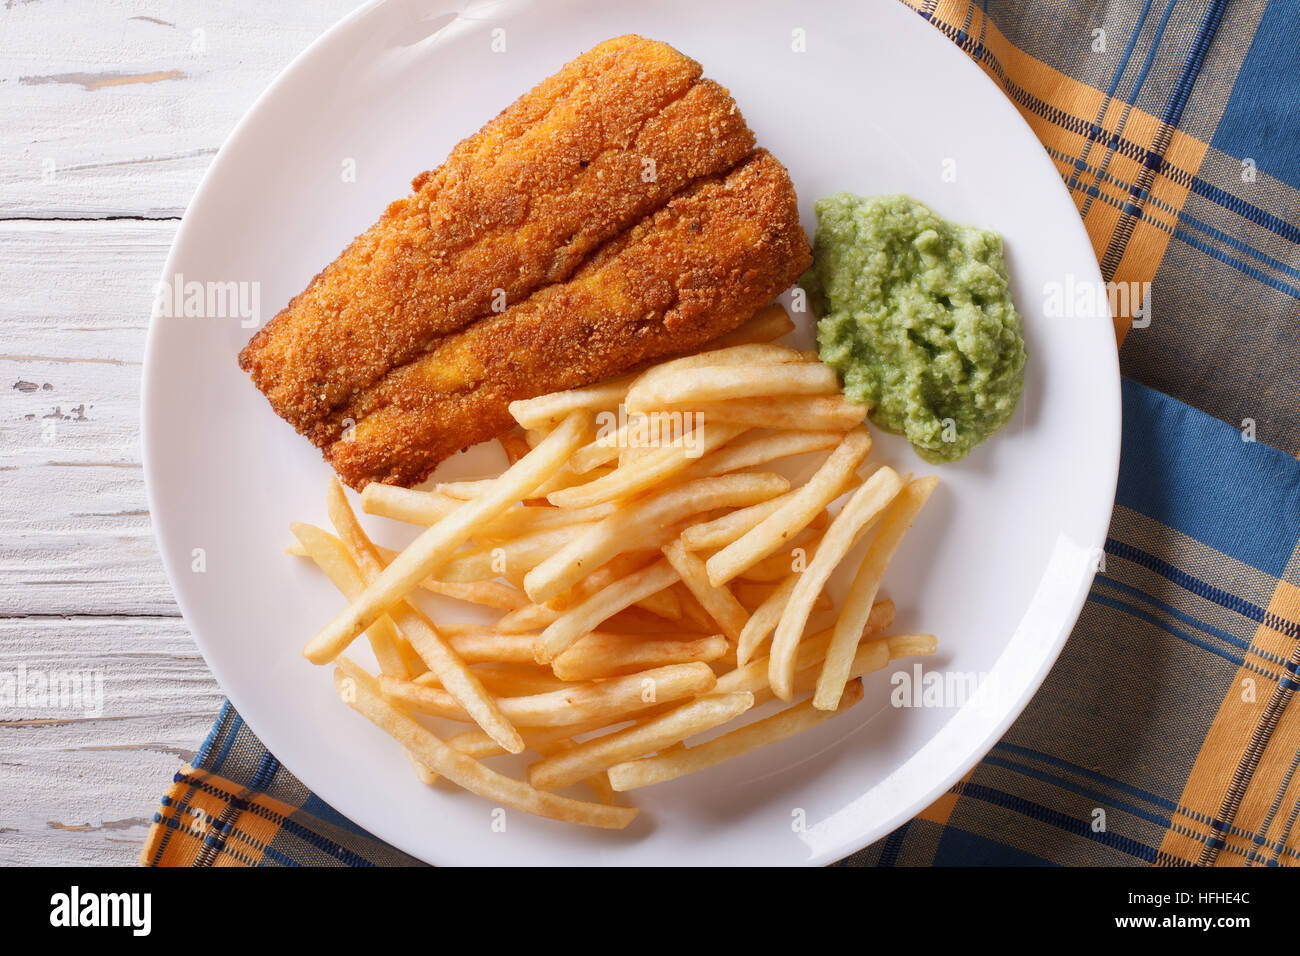 English food: fried fish in batter with chips and pea puree close-up on a plate. horizontal view from above Stock Photo